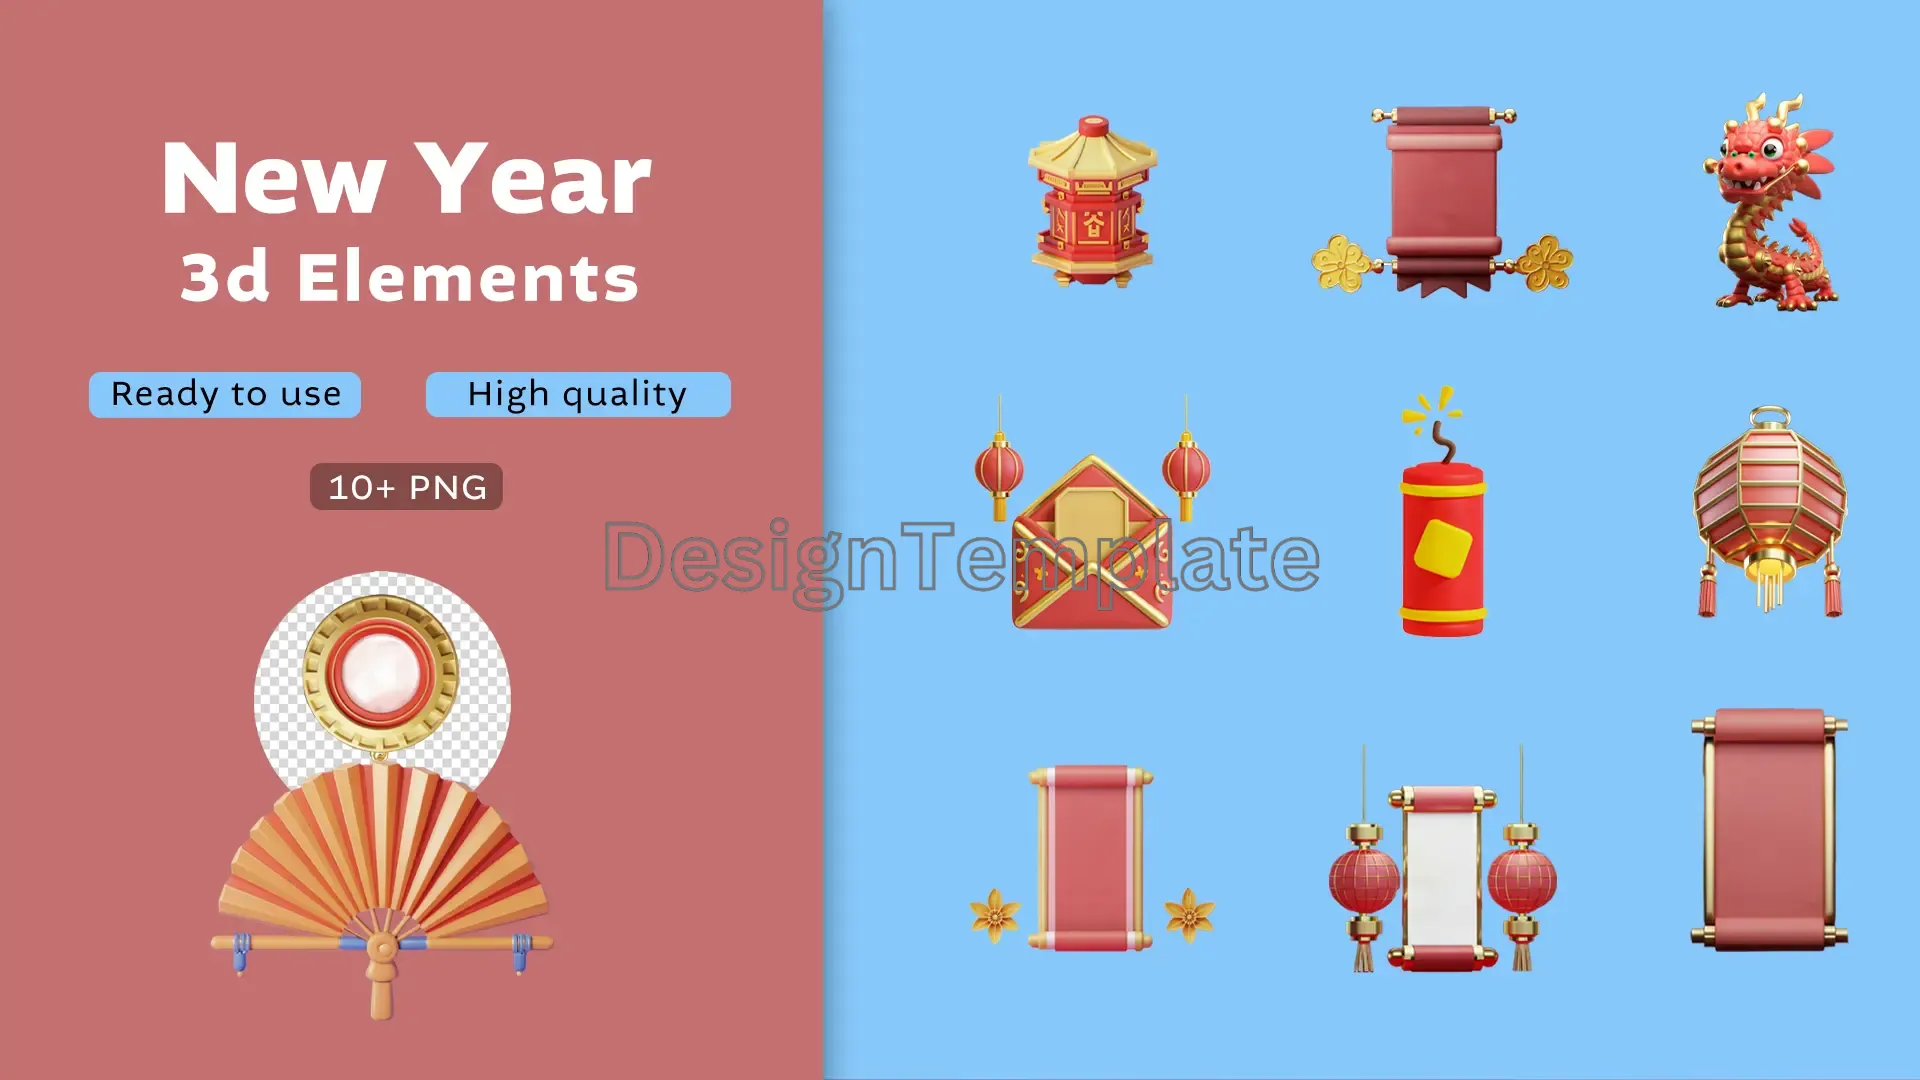 New Beginnings Vibrant 3D New Year Elements Collection image